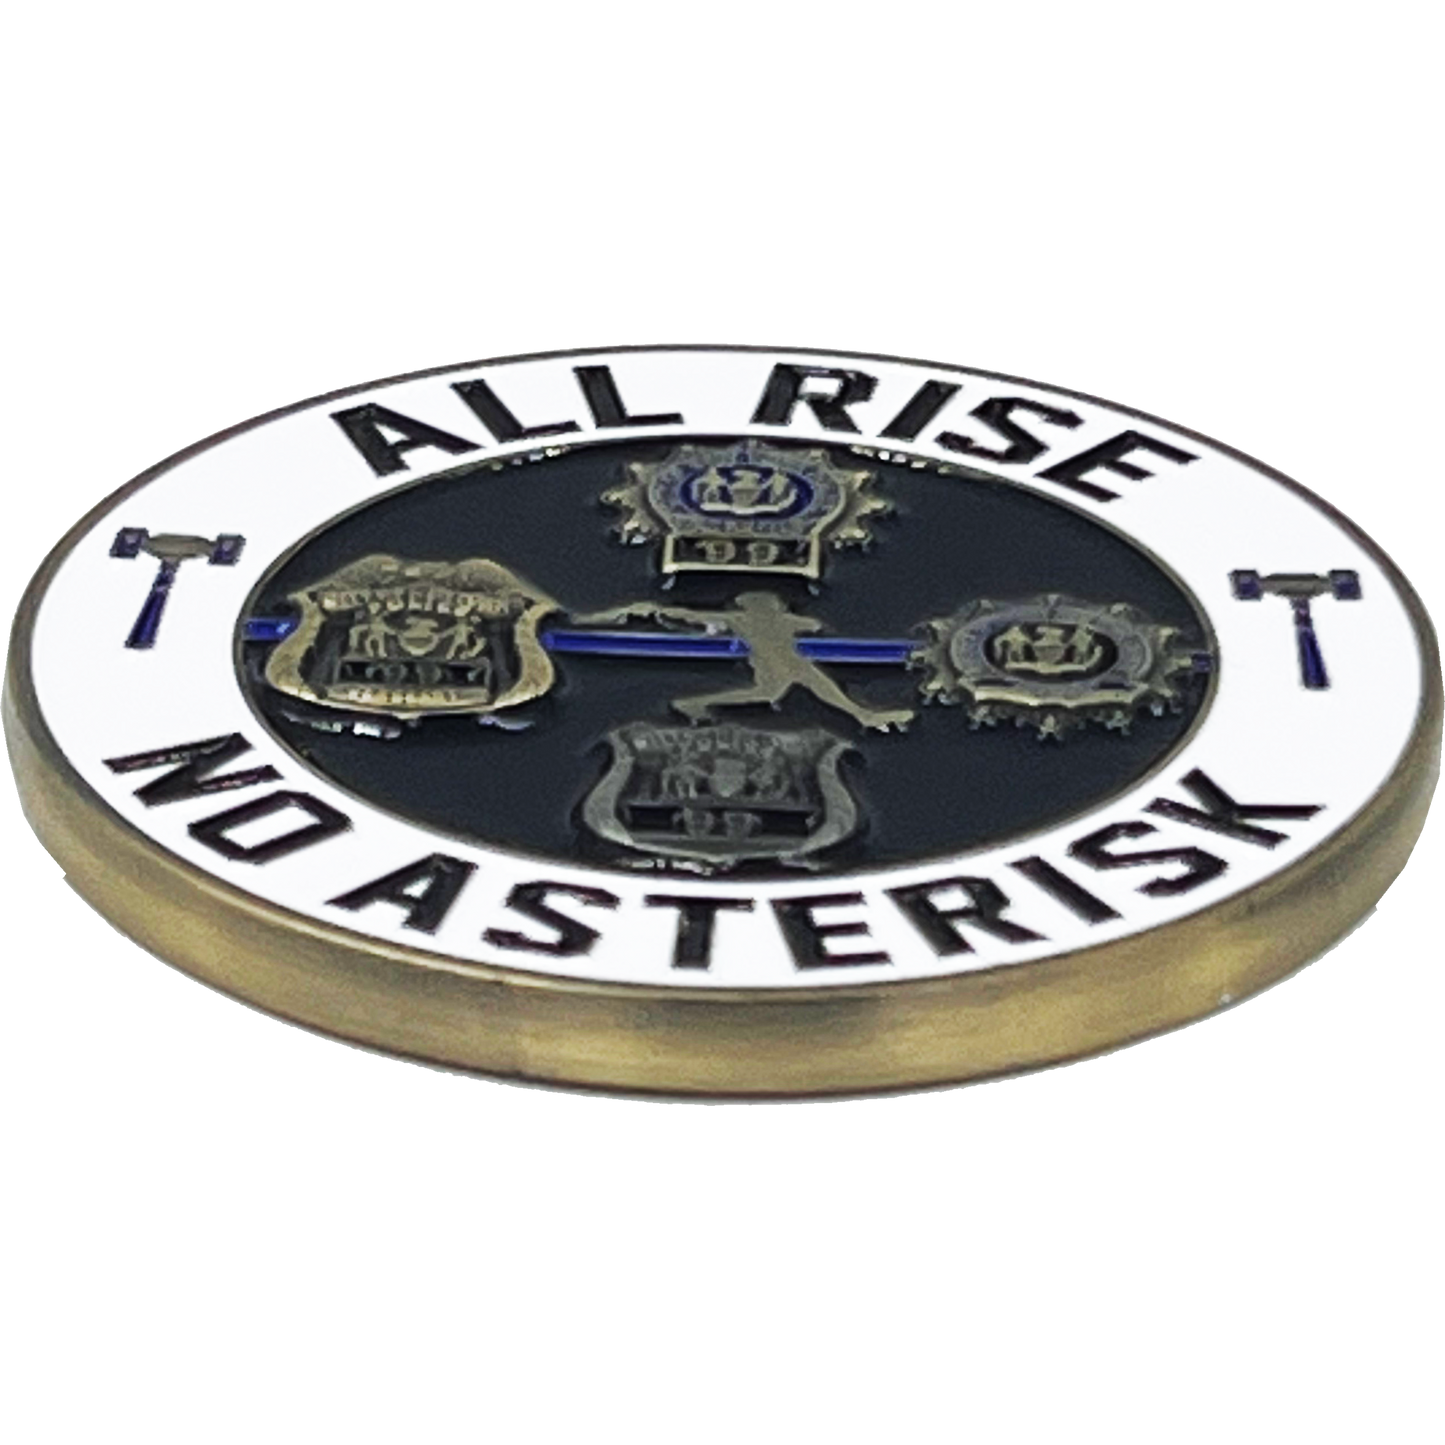 GL12-001 All Rise 99 NYPD Challenge Coin The Judge Officer Sergeant Detective District Attorney DA